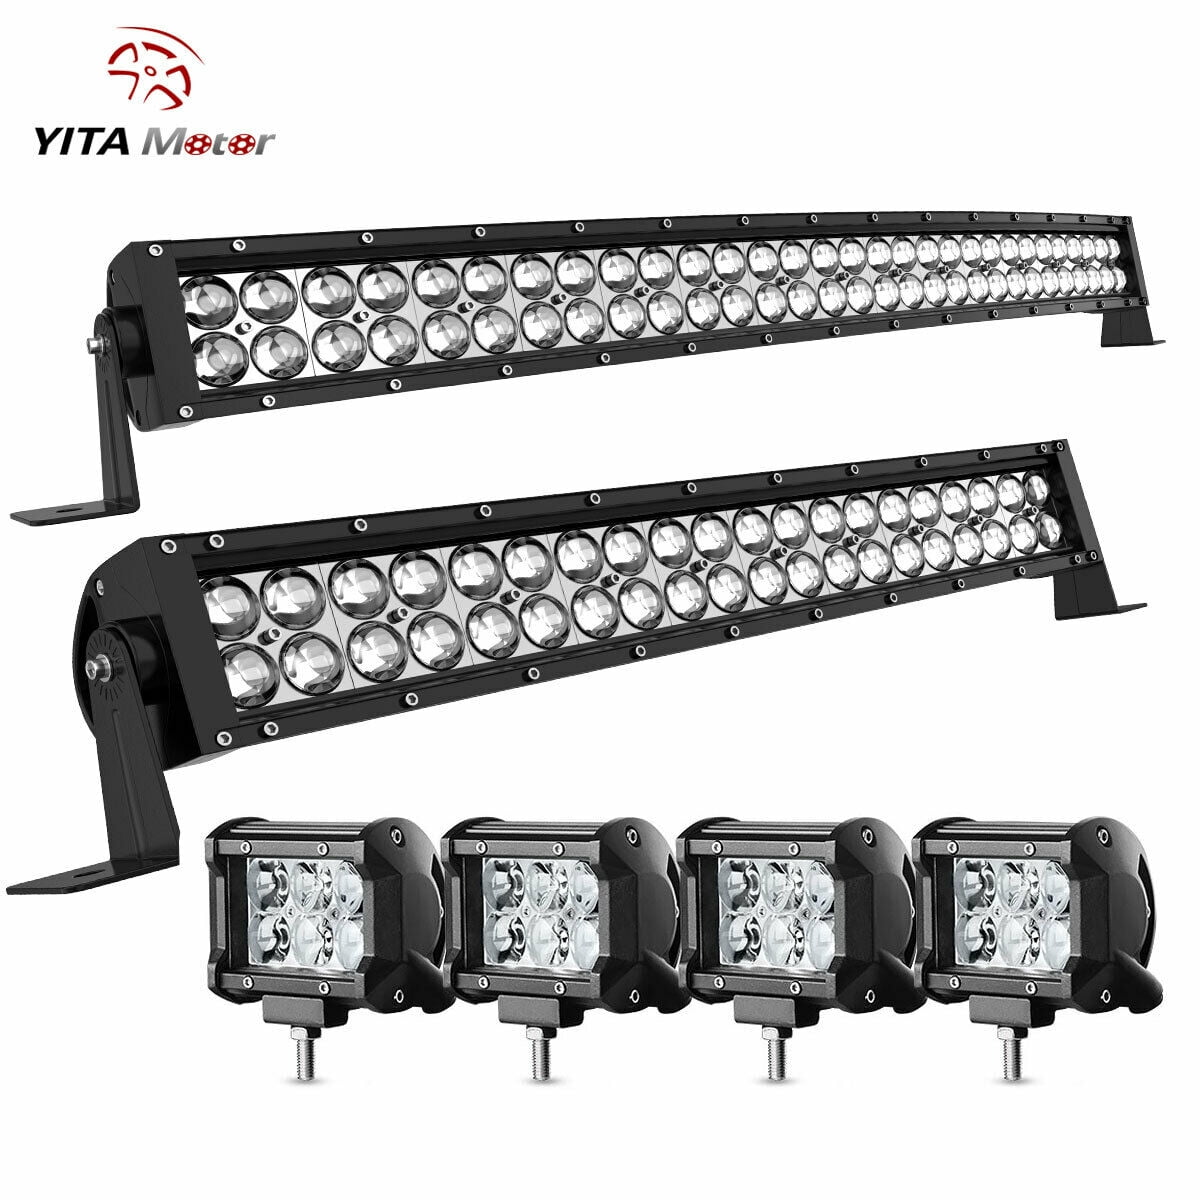 2pcs 32inch Curved 180W LED Work Light Bar Combo OffRoad SUV Lamp Car Light 4WD